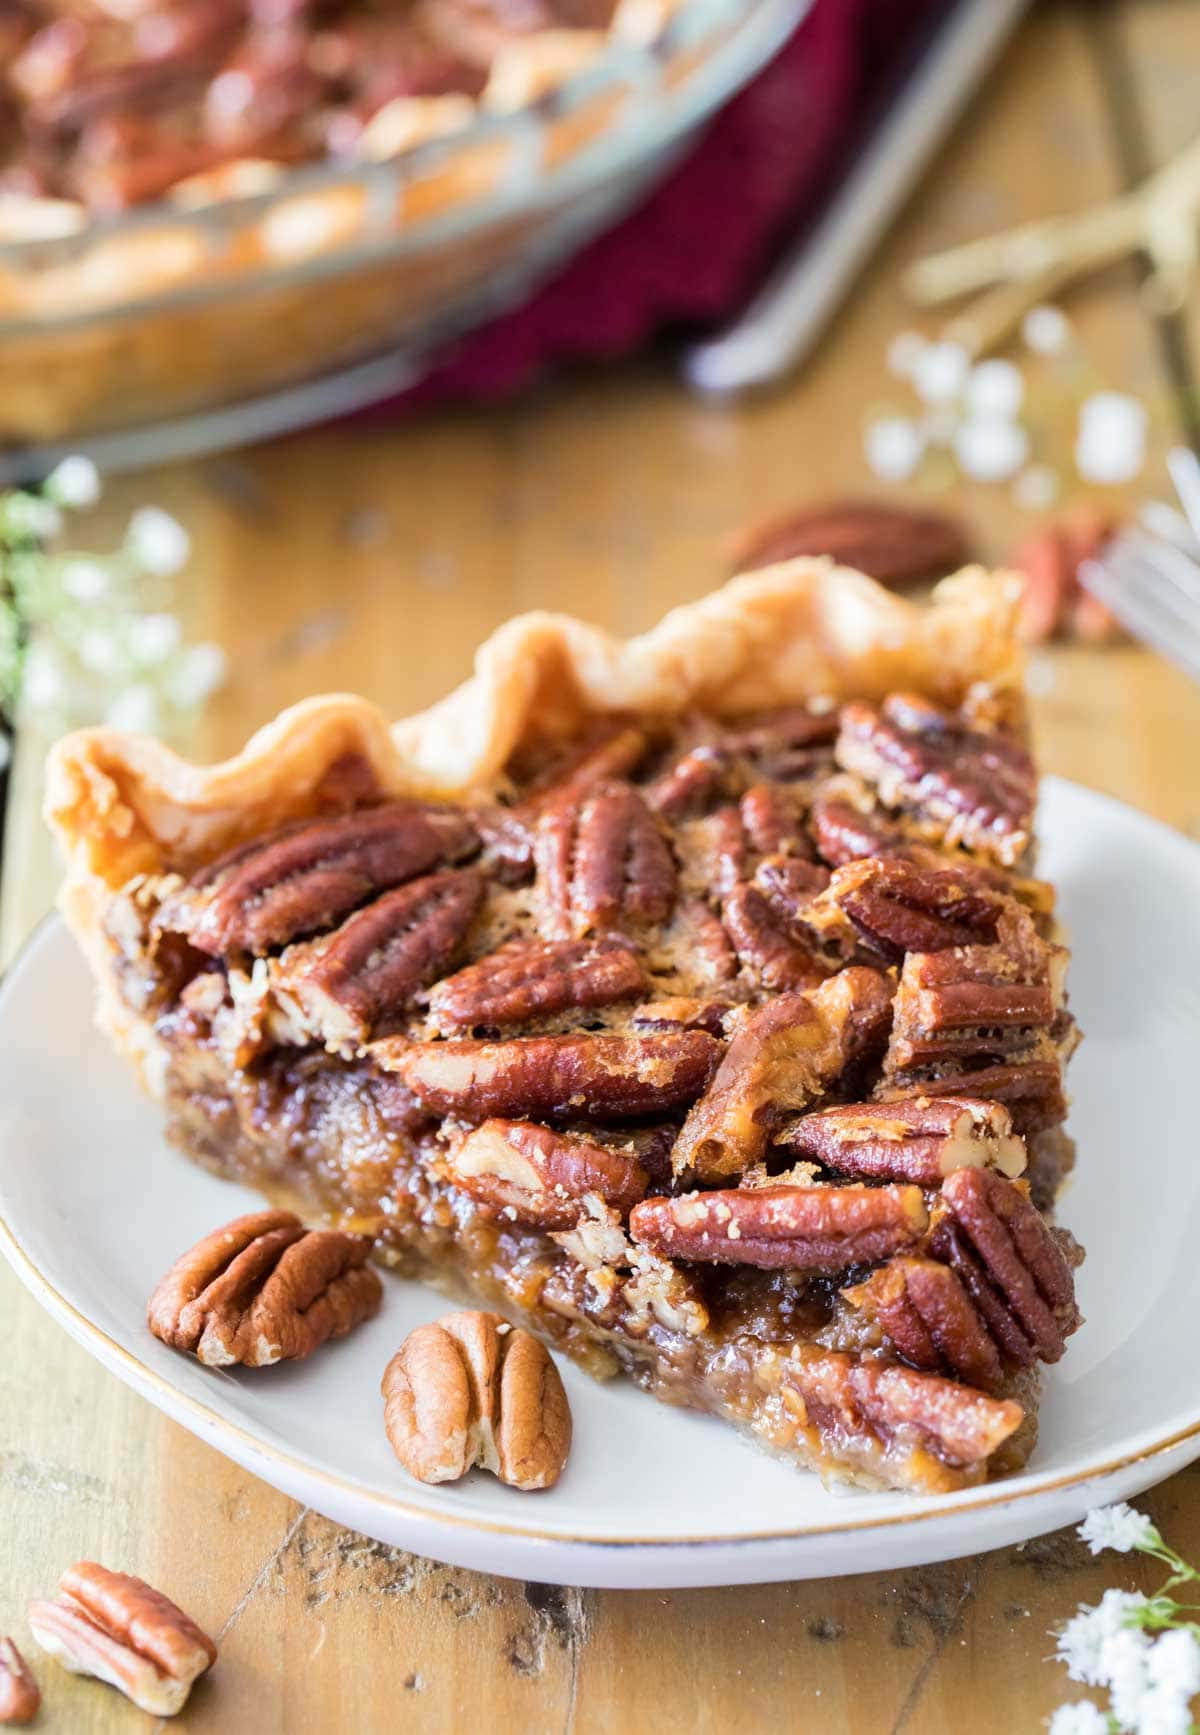 Slice of pecan pie on a white plate.